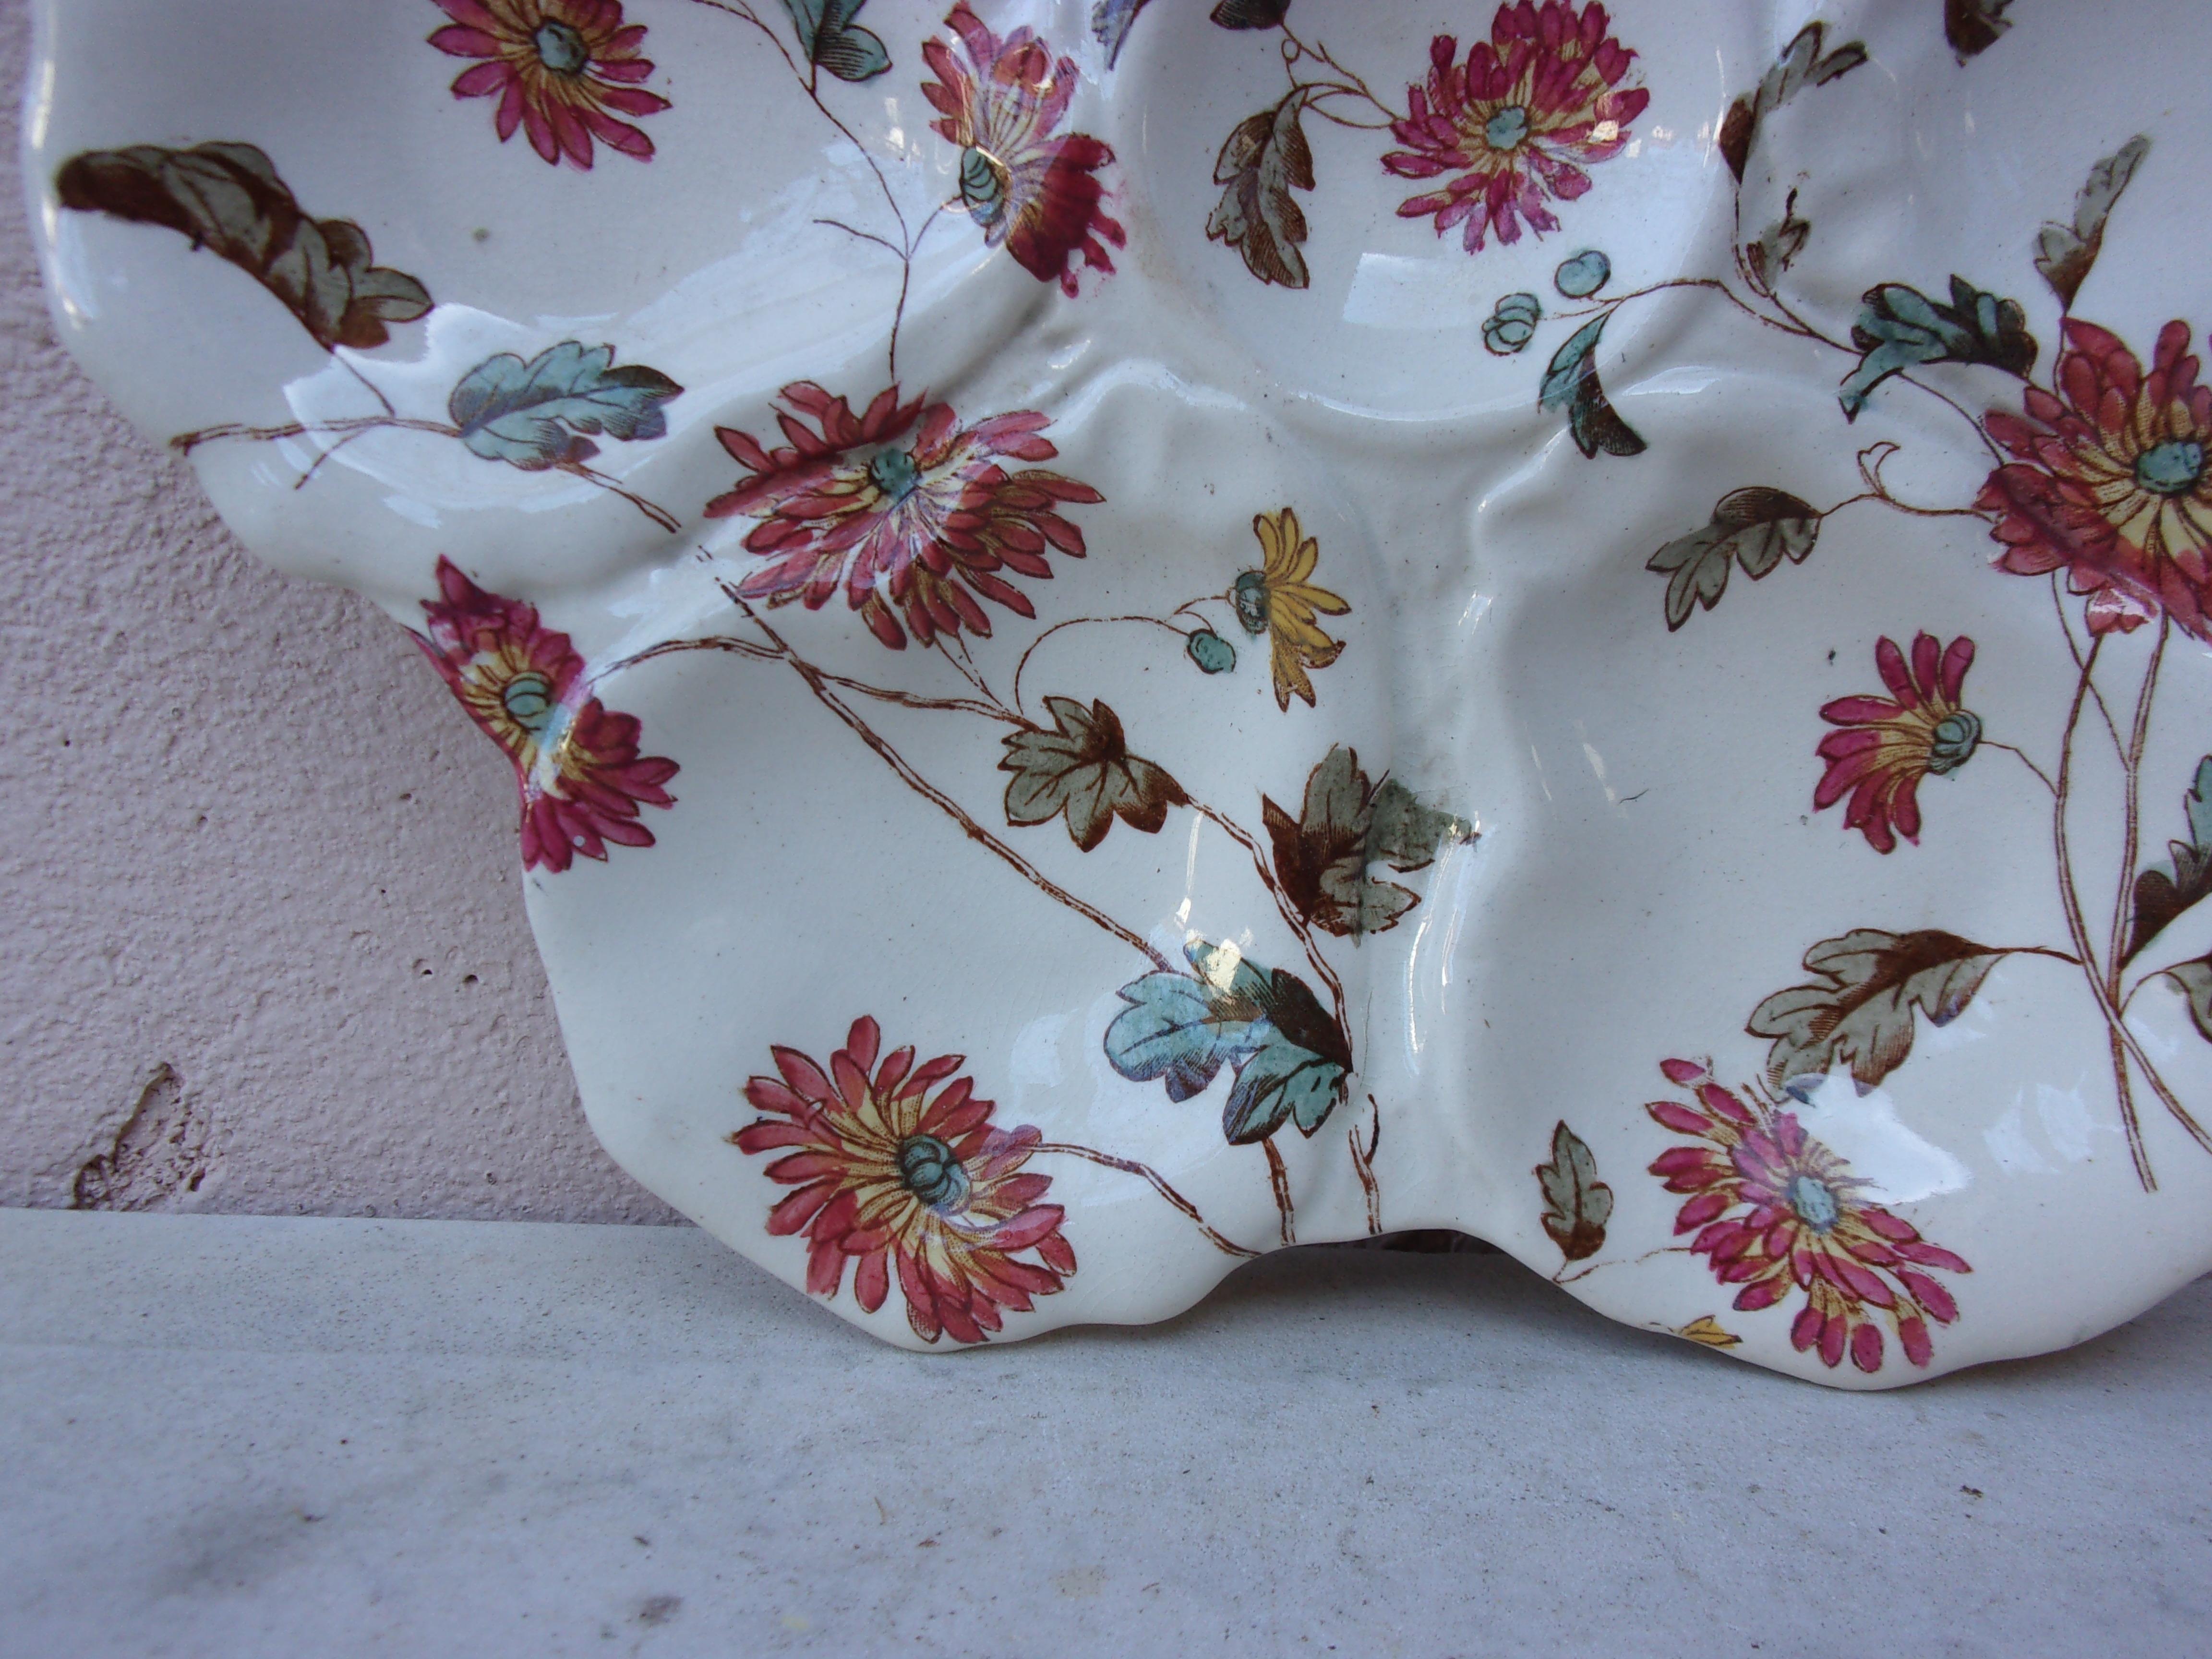 19th century English oyster plate with flowers Adderley ware.